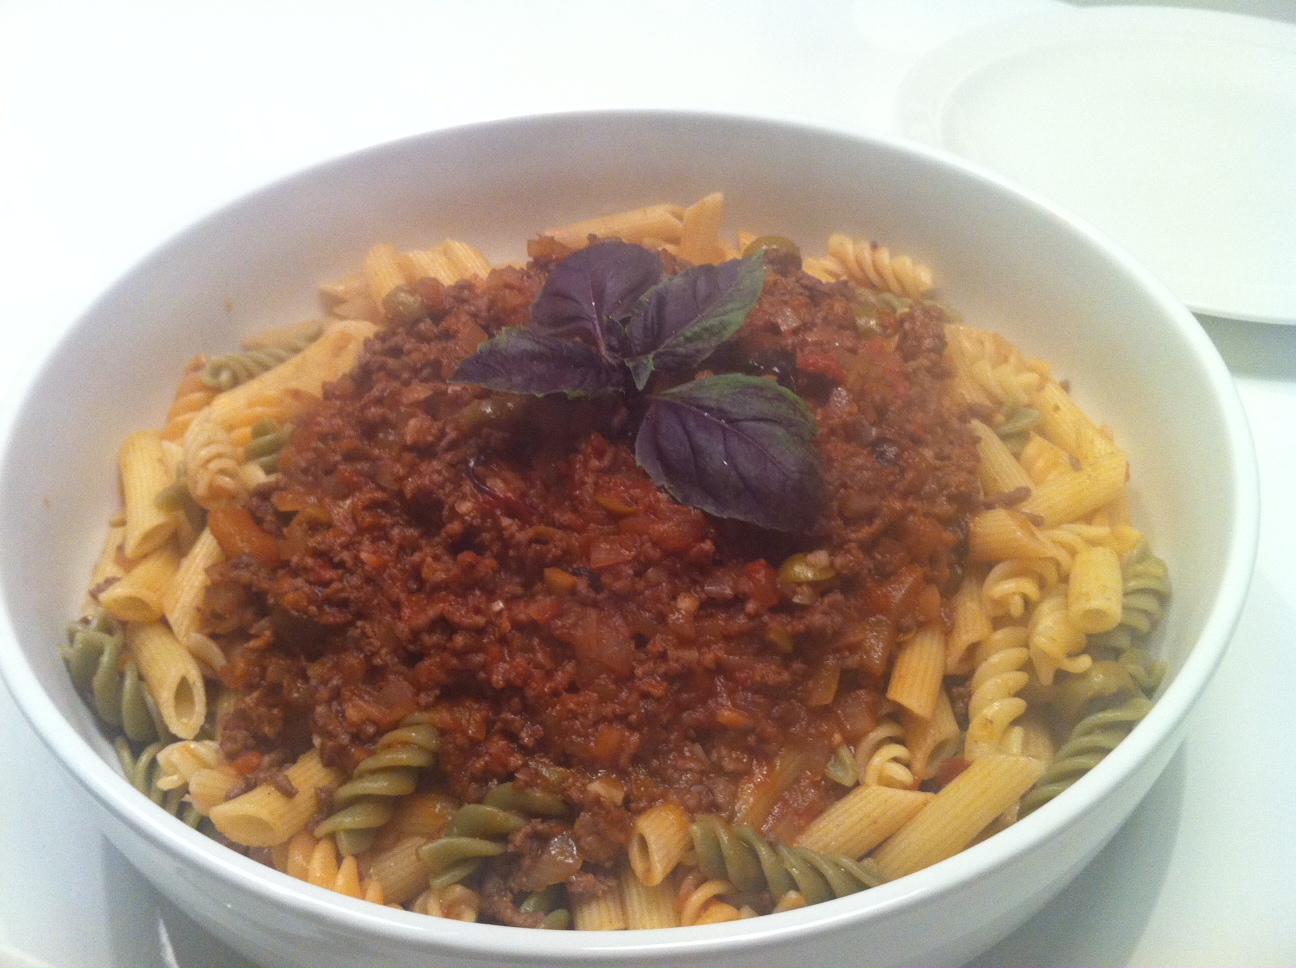 a bowl of pasta with meat sauce and leafy greens